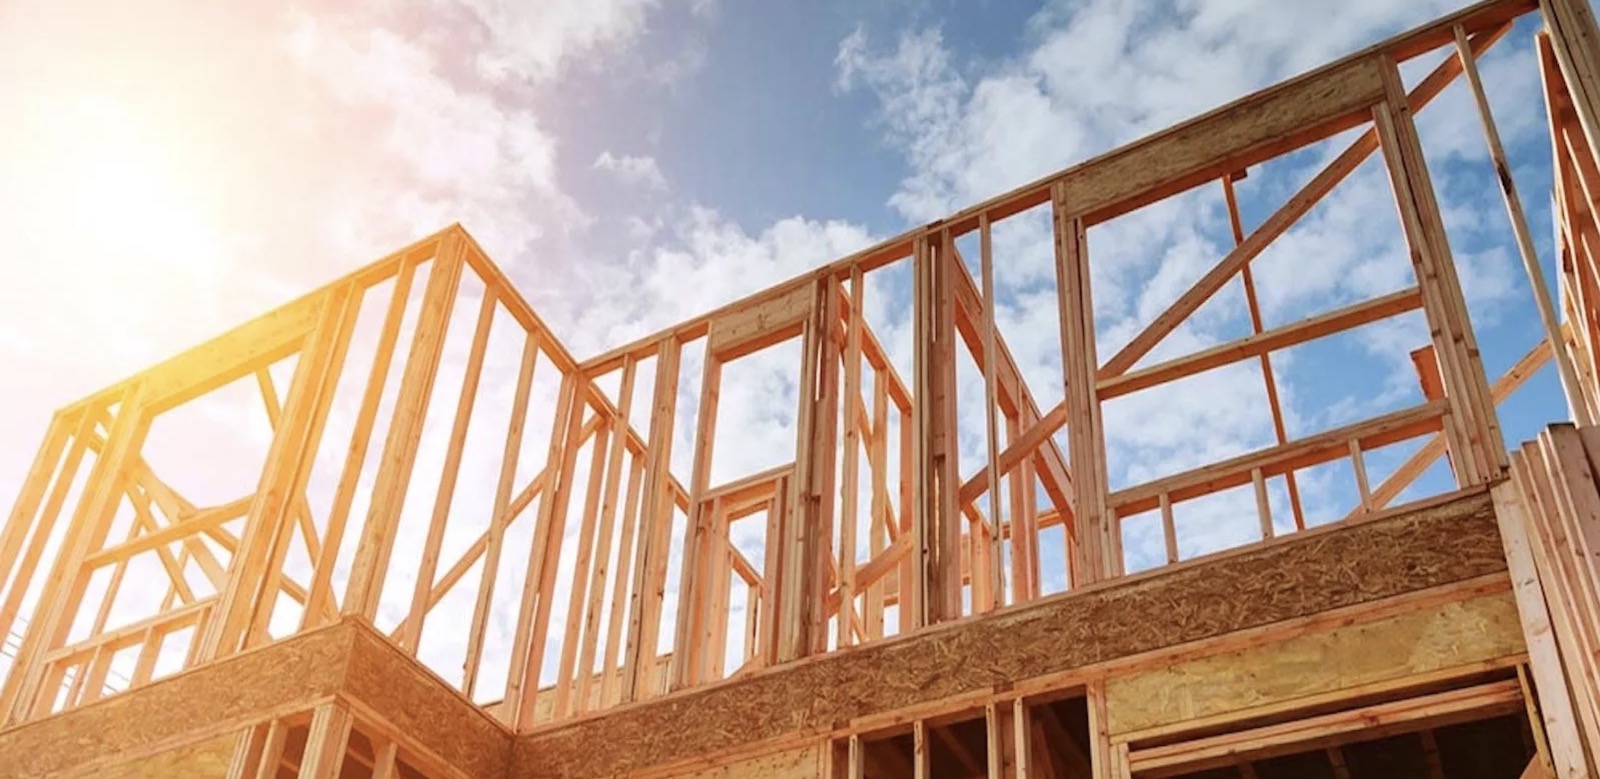 Lumber prices affecting home building